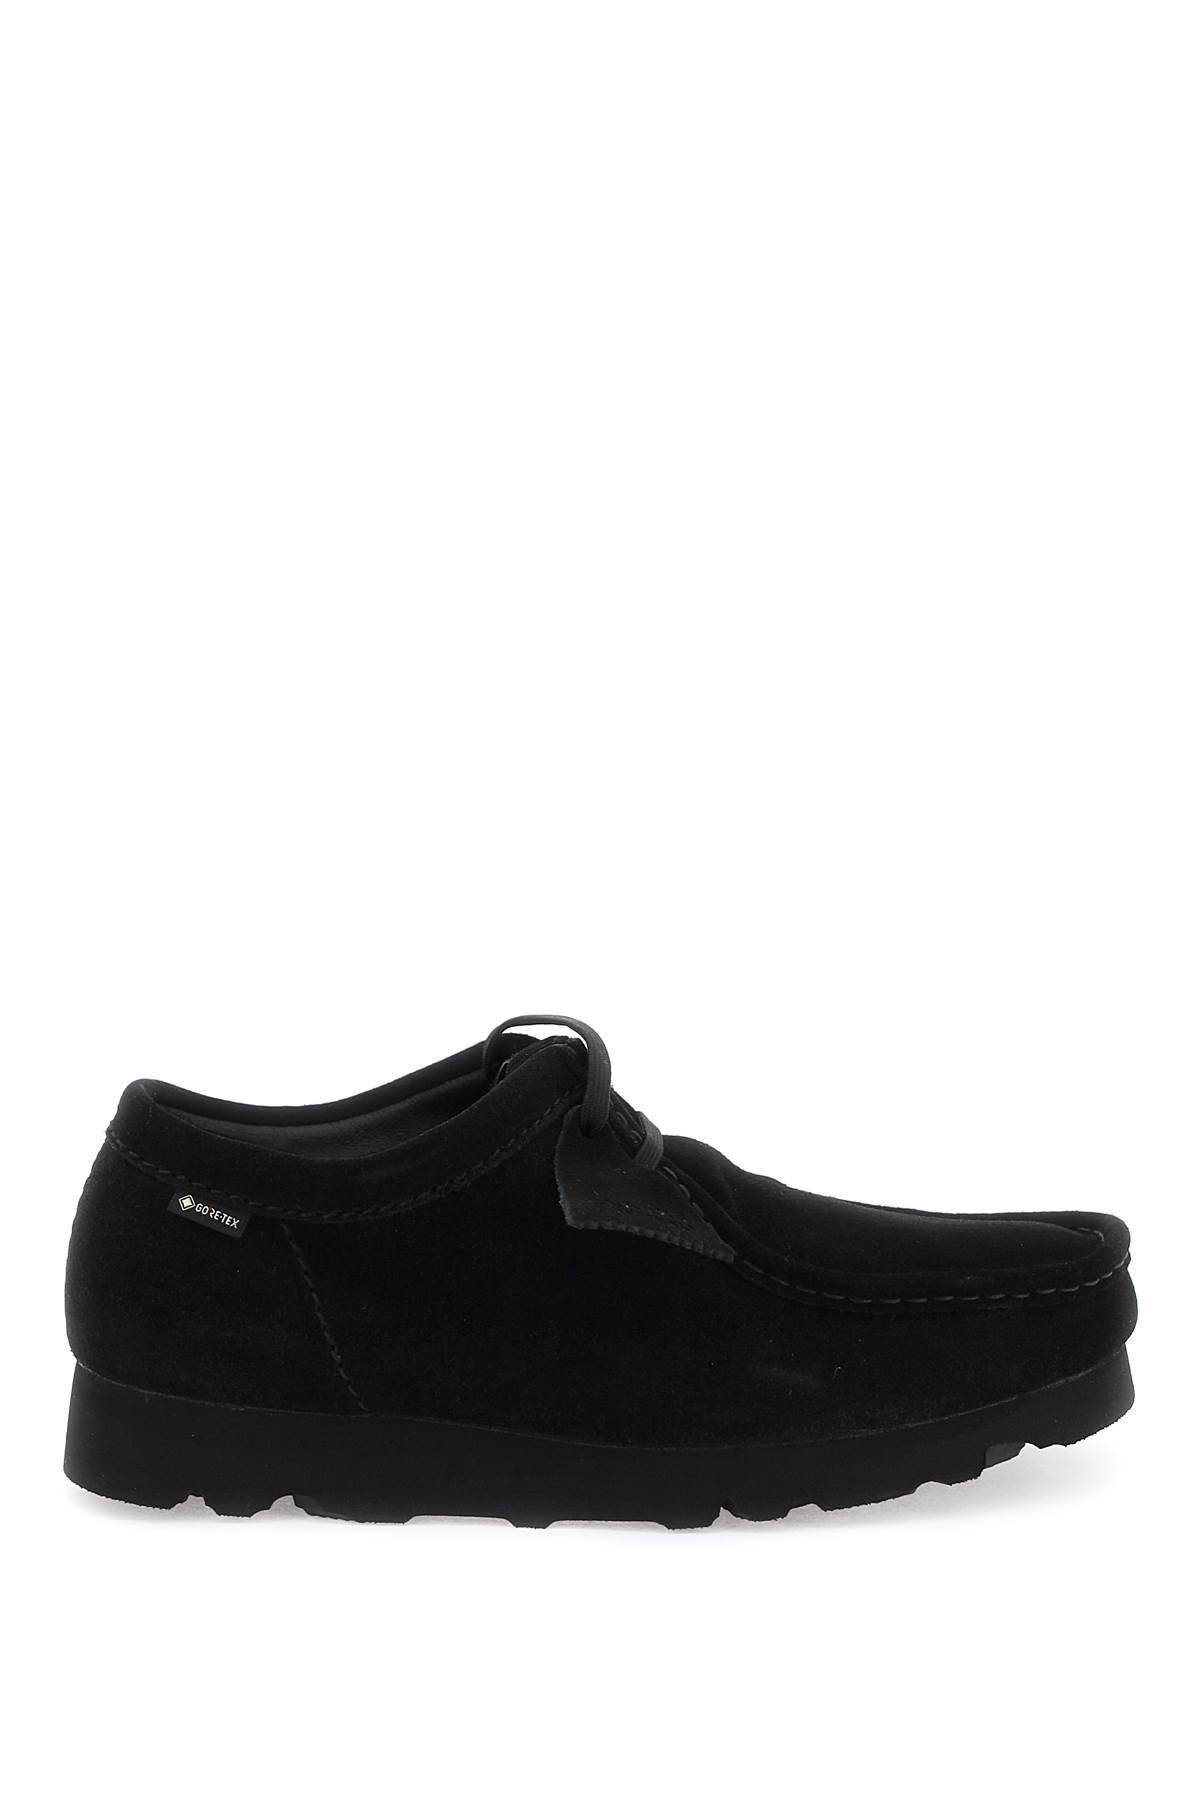 Clarks 'wallabee Gtx' Lace Up Shoes in Black for Men | Lyst